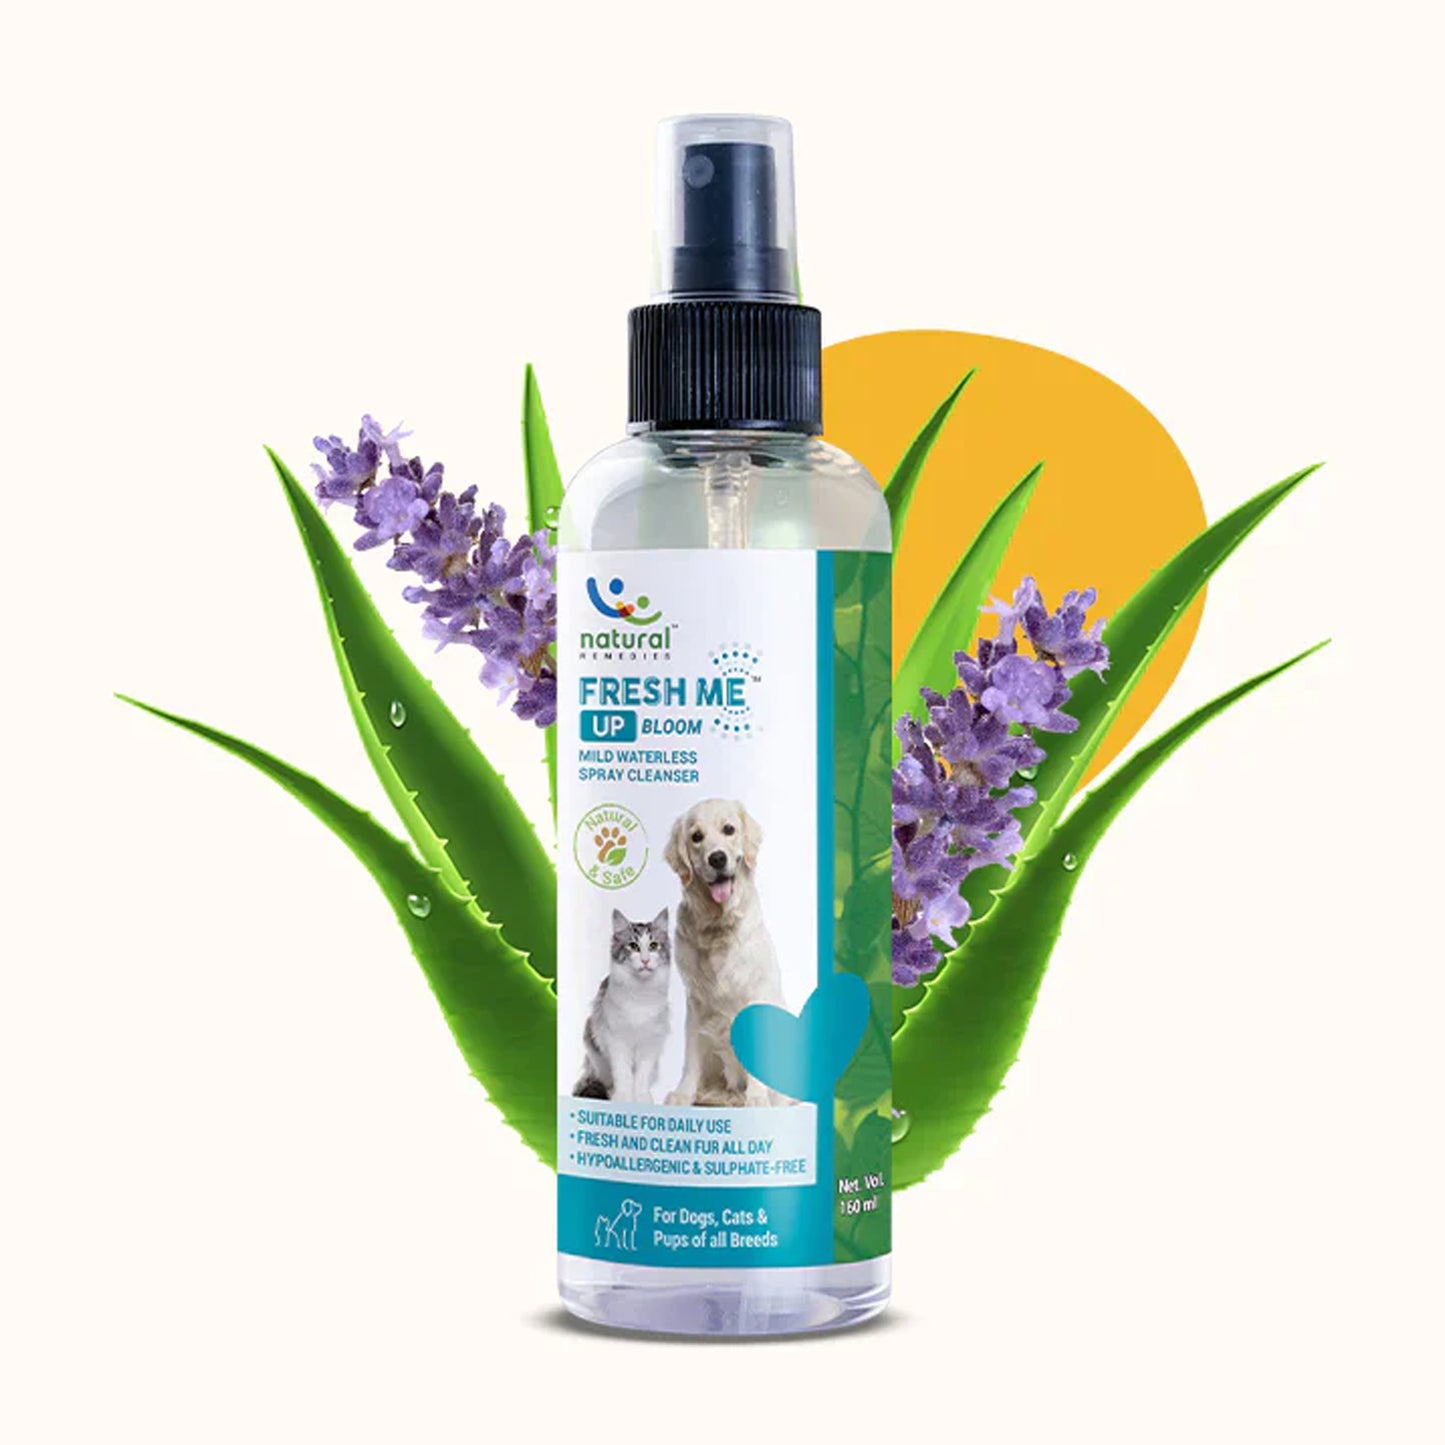 Pet Natural Remedies - Fresh Me Up Bloom For Dogs and Cat